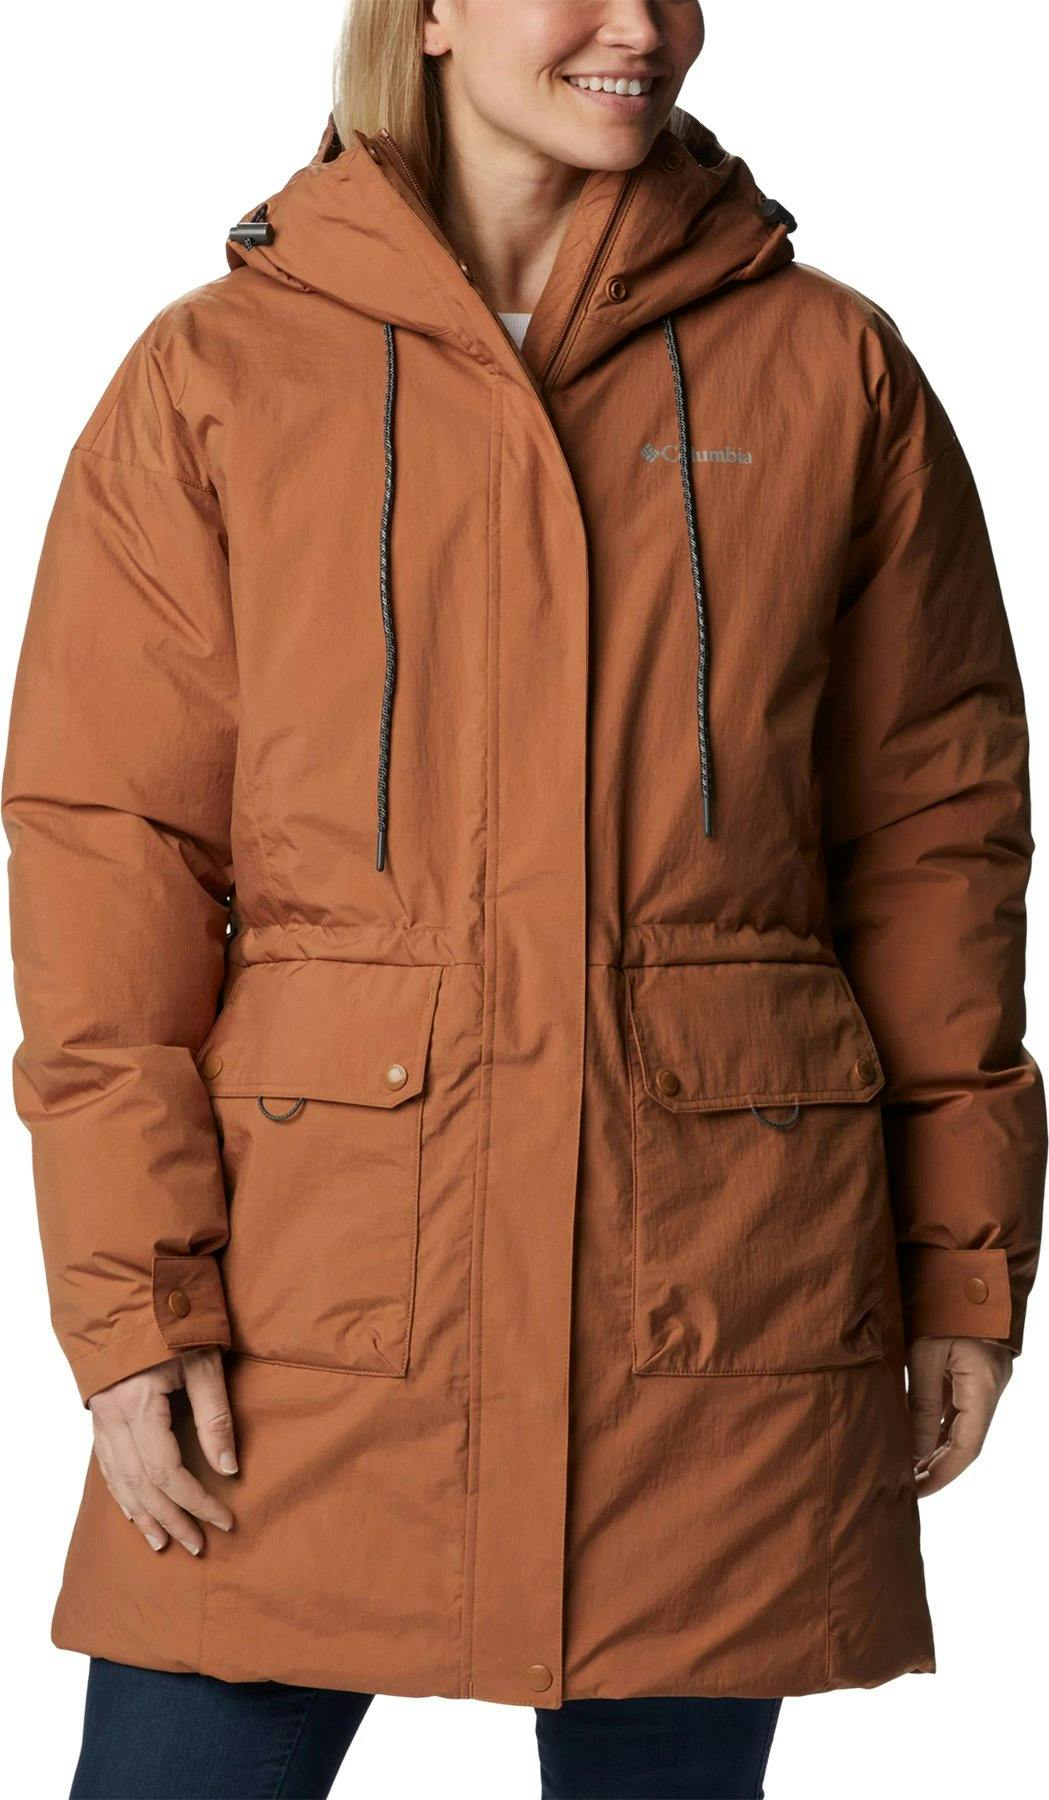 Product image for Rosewood Parka - Women's